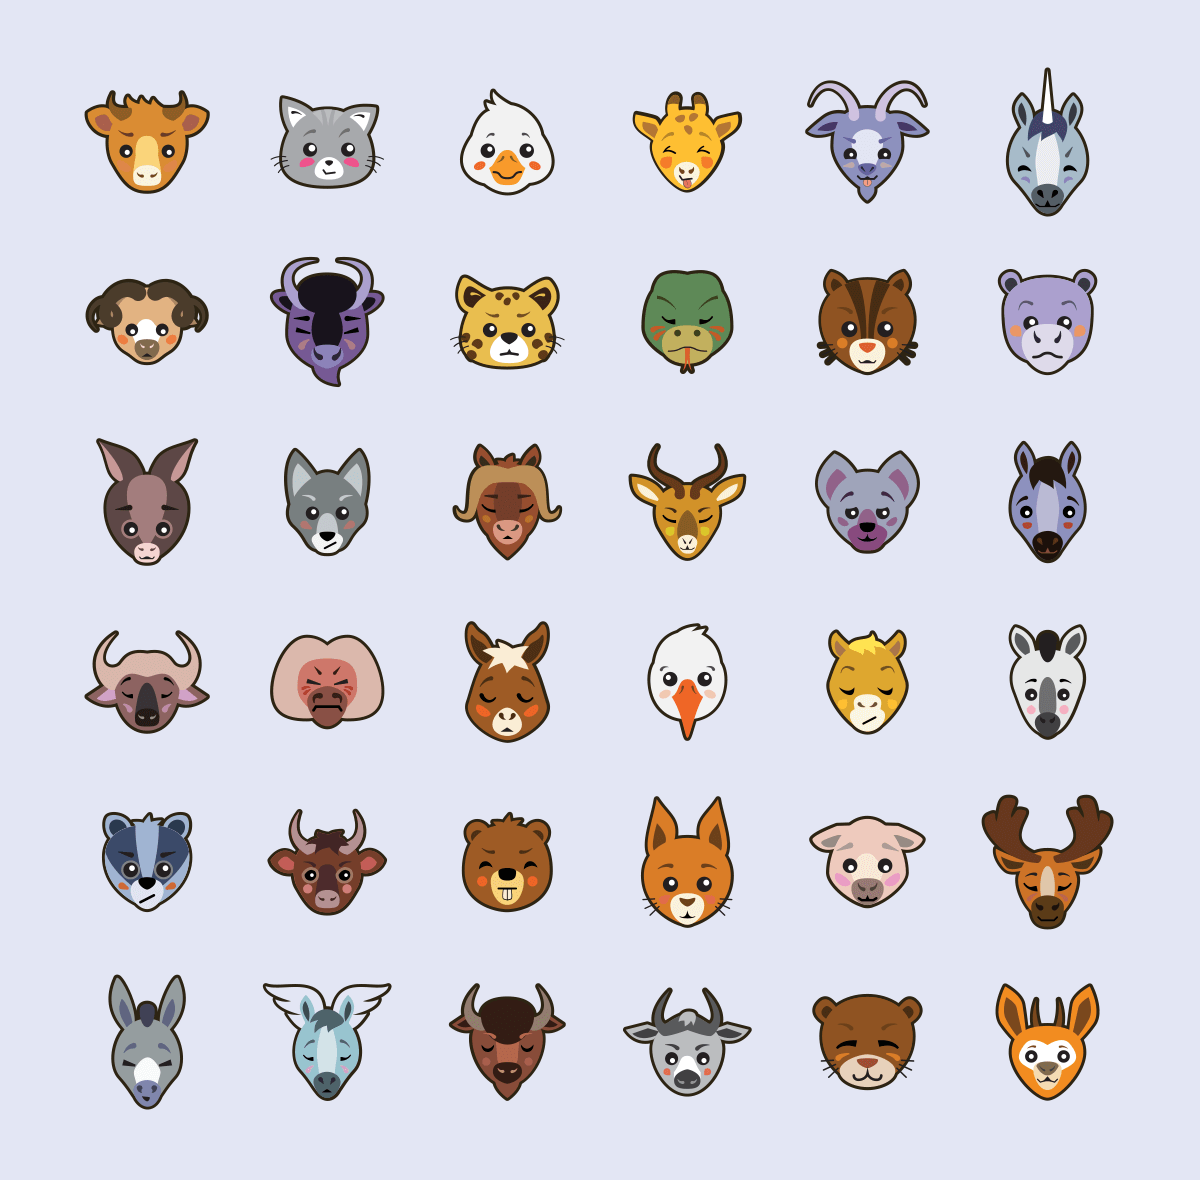 A free colorful animal icons